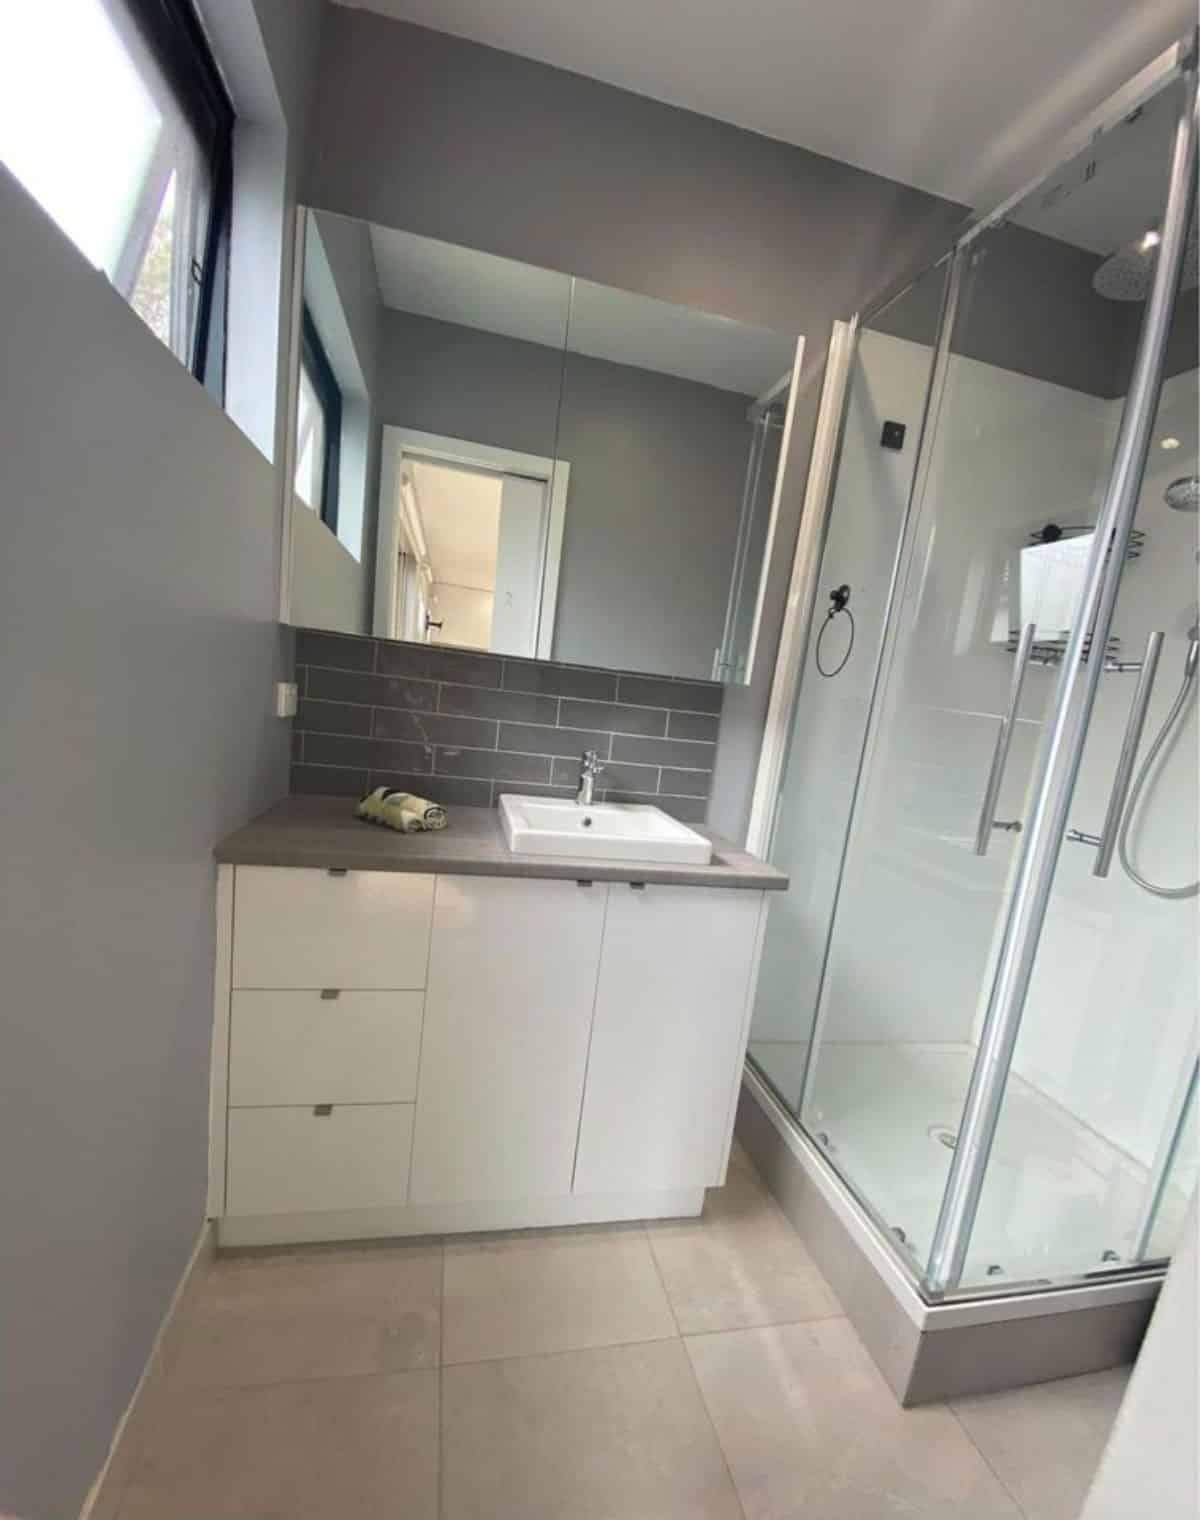 huge sink with vanity and full length shower with glass enclosure